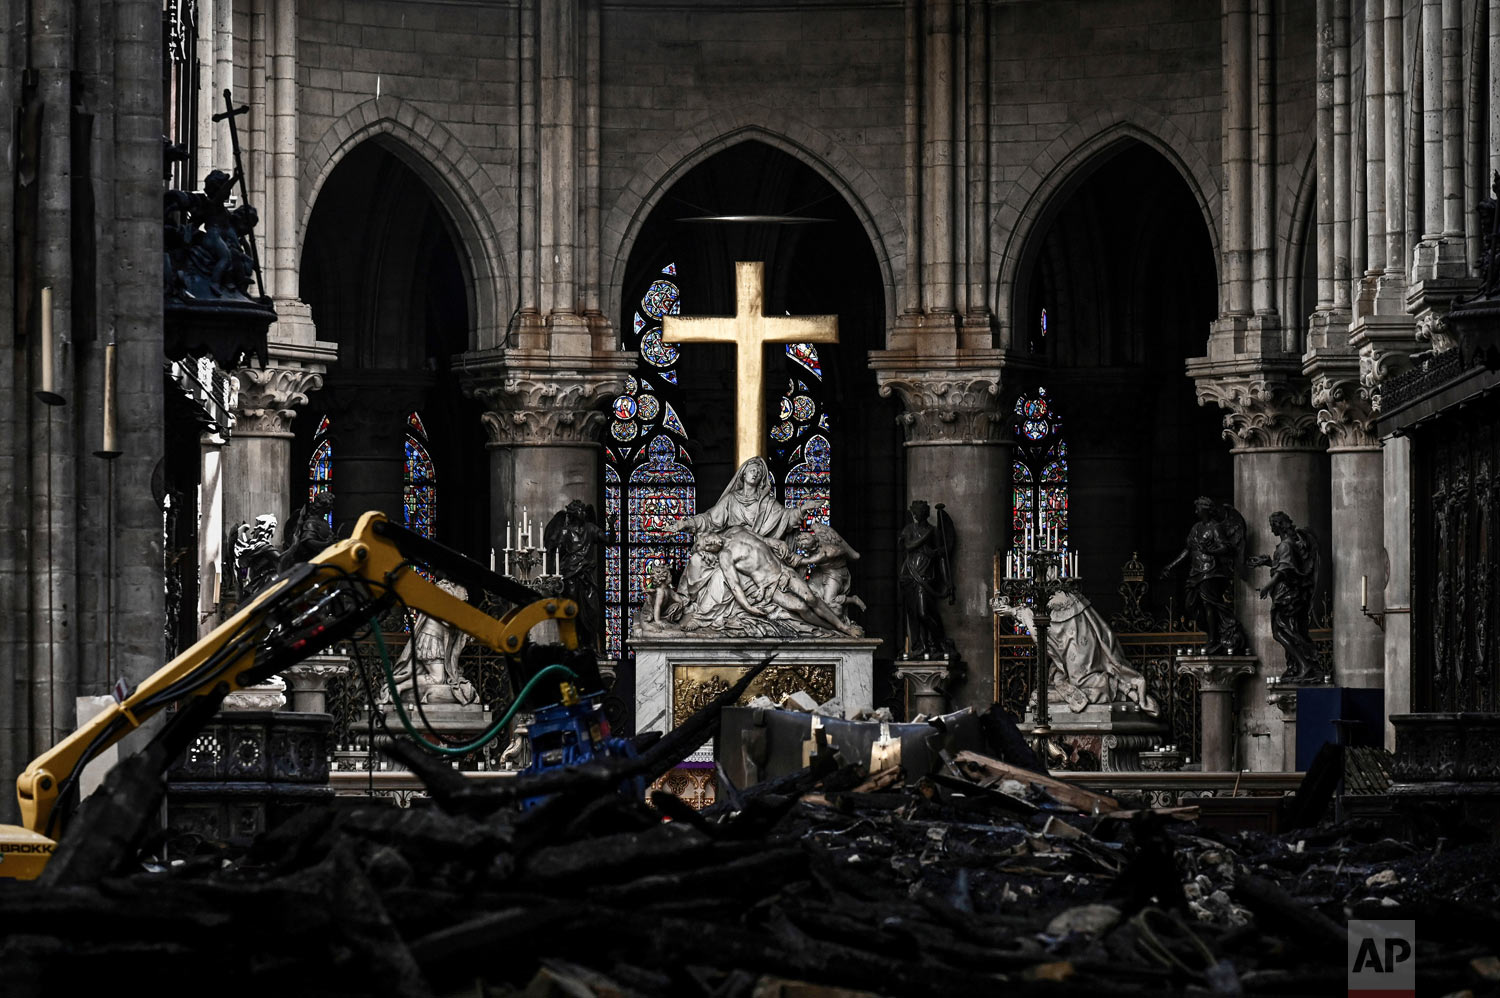  Rubble lies below the Pieta sculpture and a cross inside the Notre Dame de Paris cathedral on Wednesday May 15, 2019 in Paris. (Philippe Lopez/Pool via AP) 